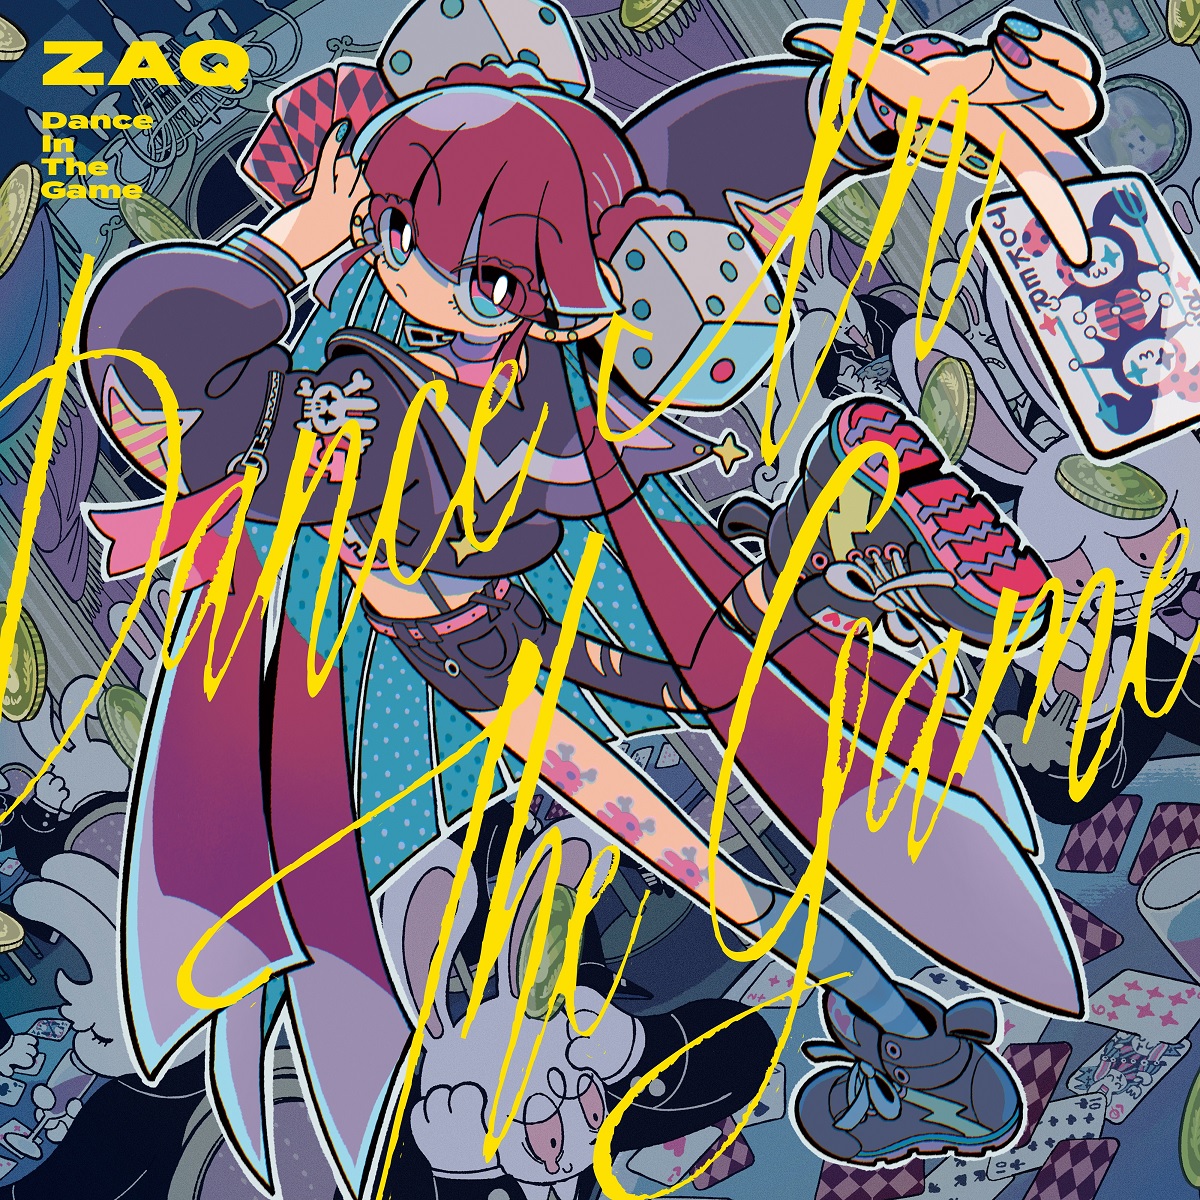 『ZAQ - Dance In The Game』収録の『Dance In The Game』ジャケット